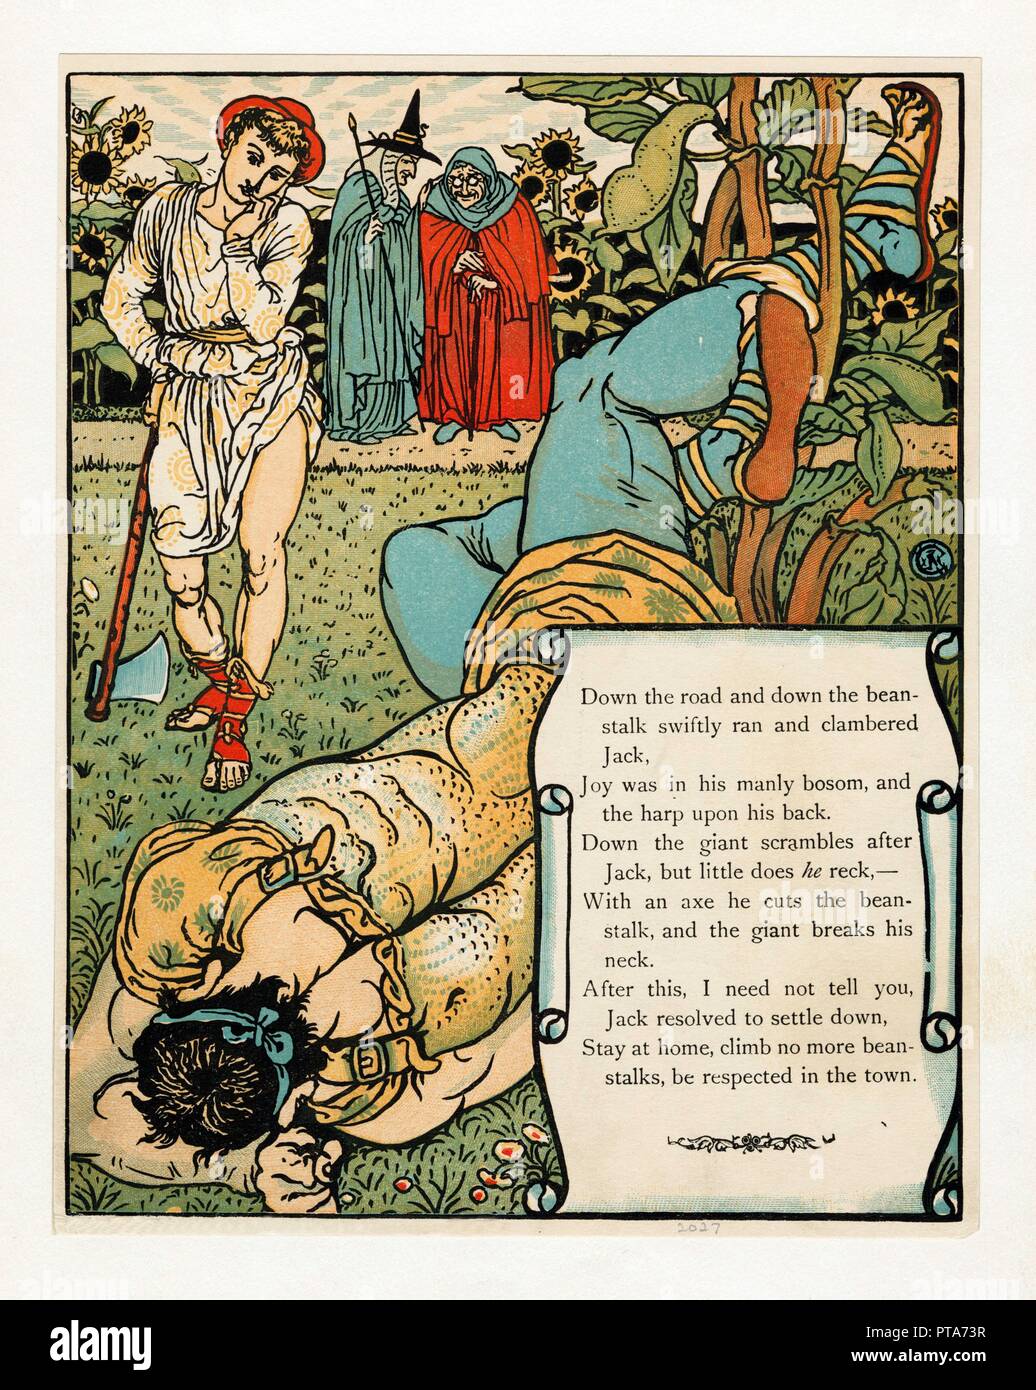 The giant breaks his neck', from The Blue Beard Picture Book, pub. 1879 (colour lithograph), 1879. Creator: Walter Crane (1845 - 1915). Stock Photo